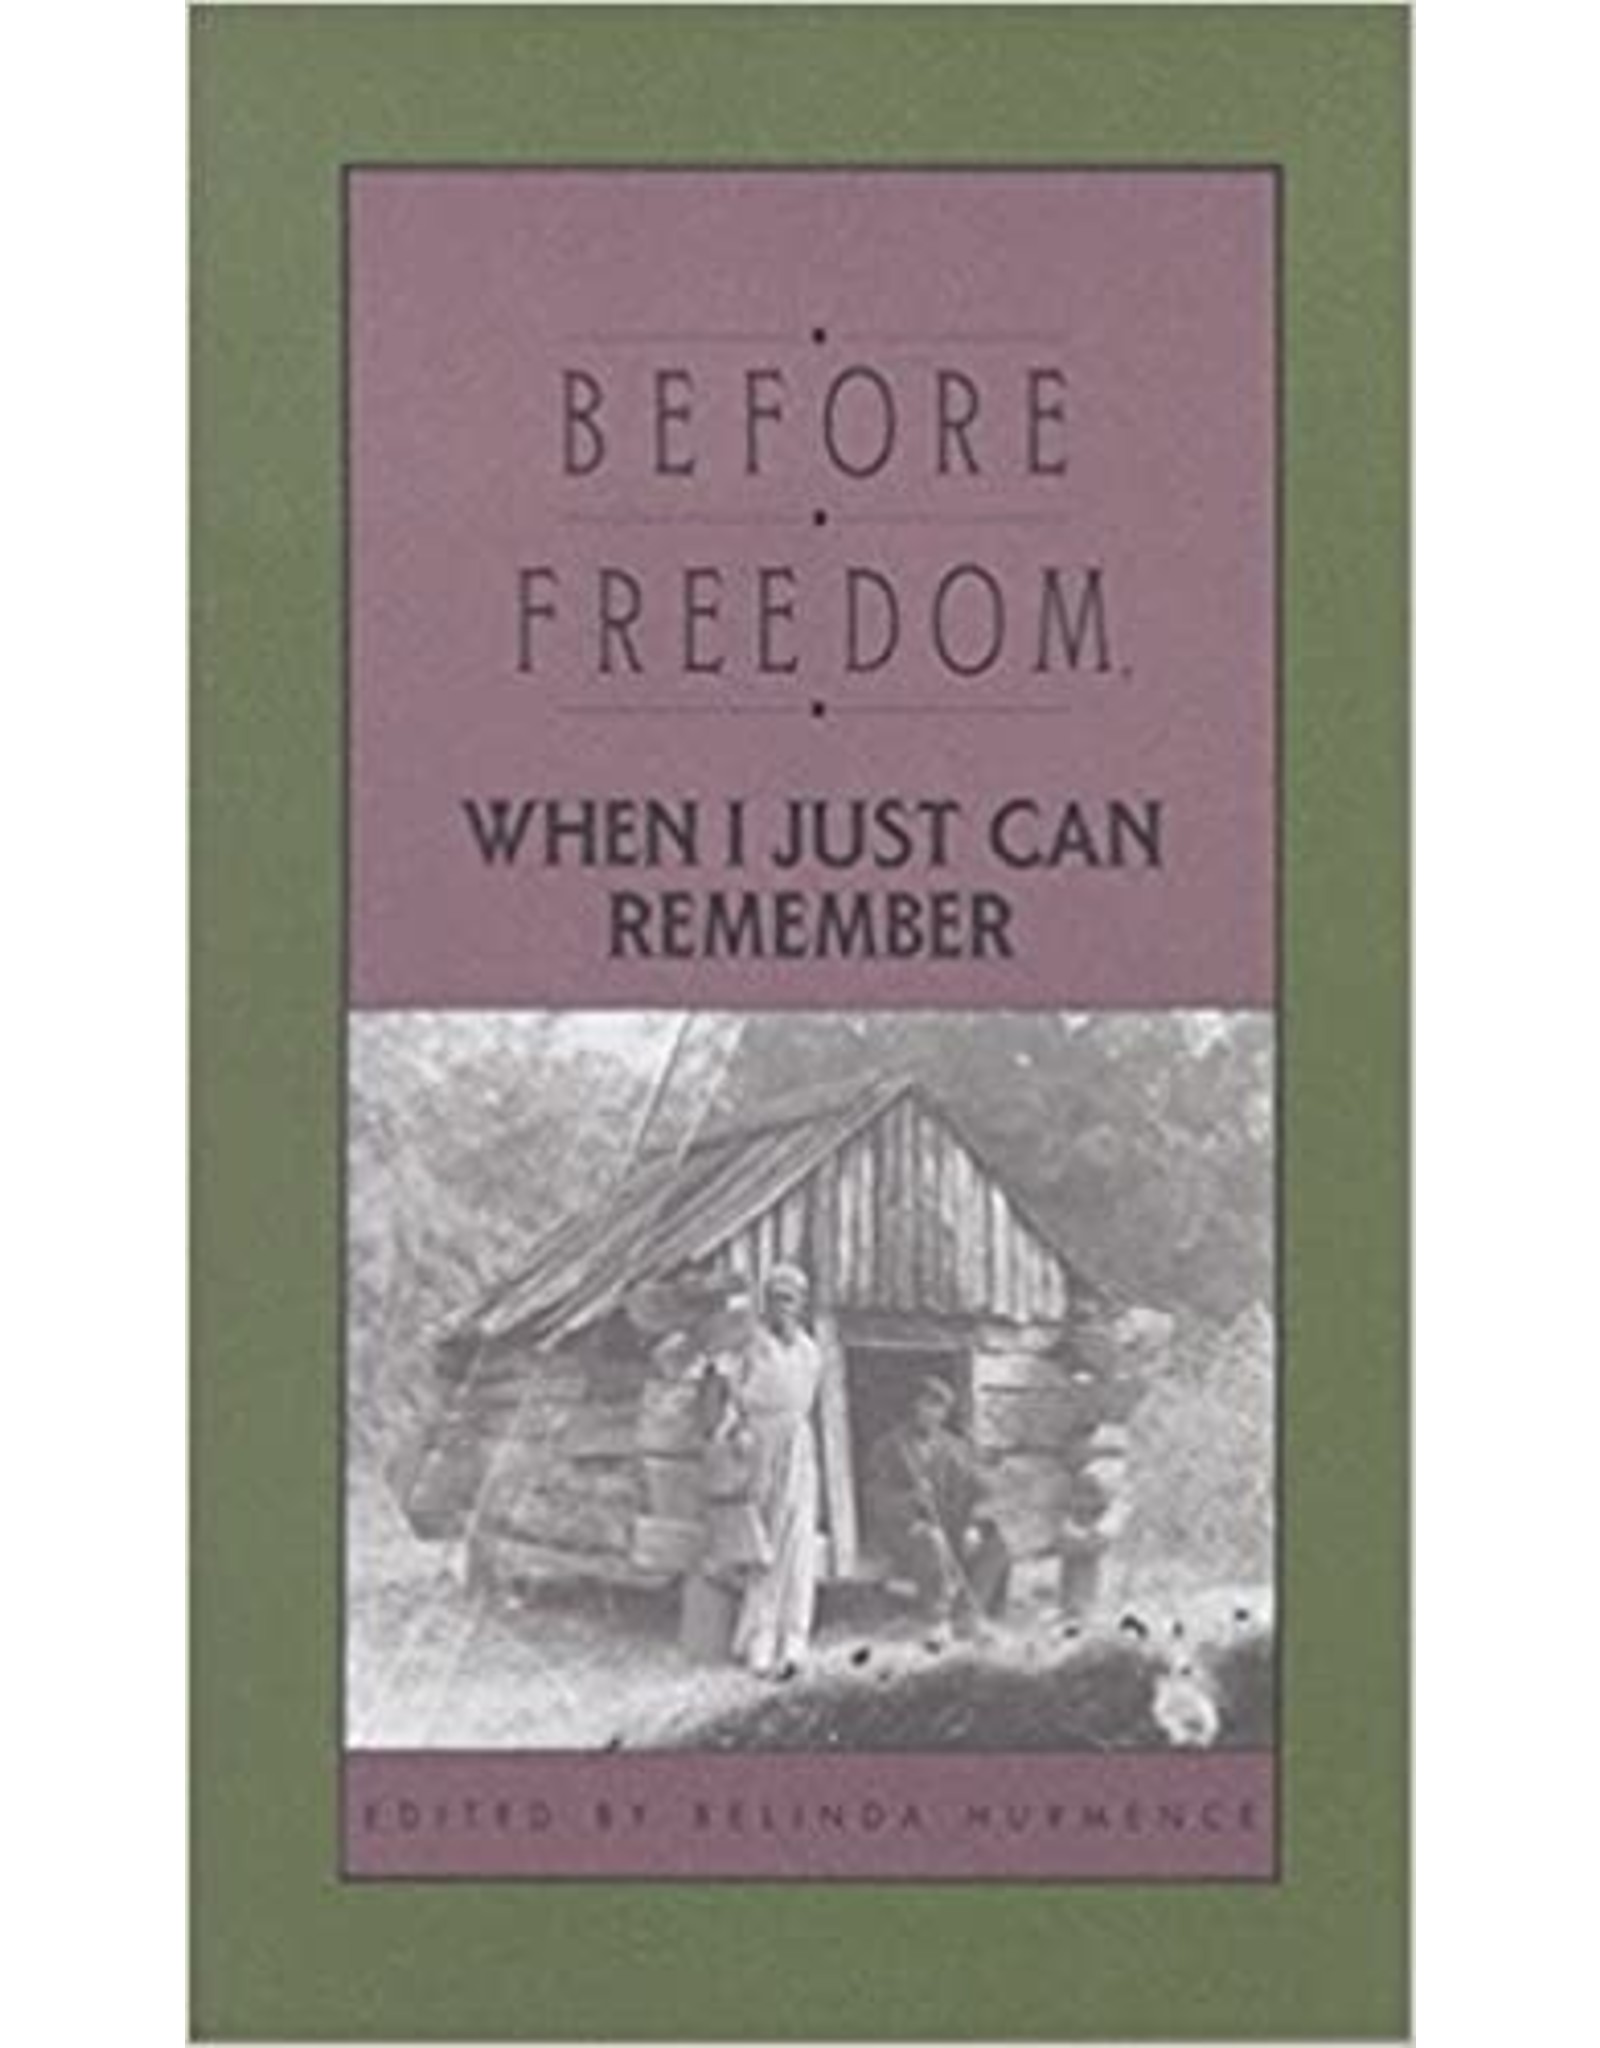 Non-Fiction: Slave Narratives Before Freedom, When I Just Can Remember: Personal Accounts of Slavery in South Carolina